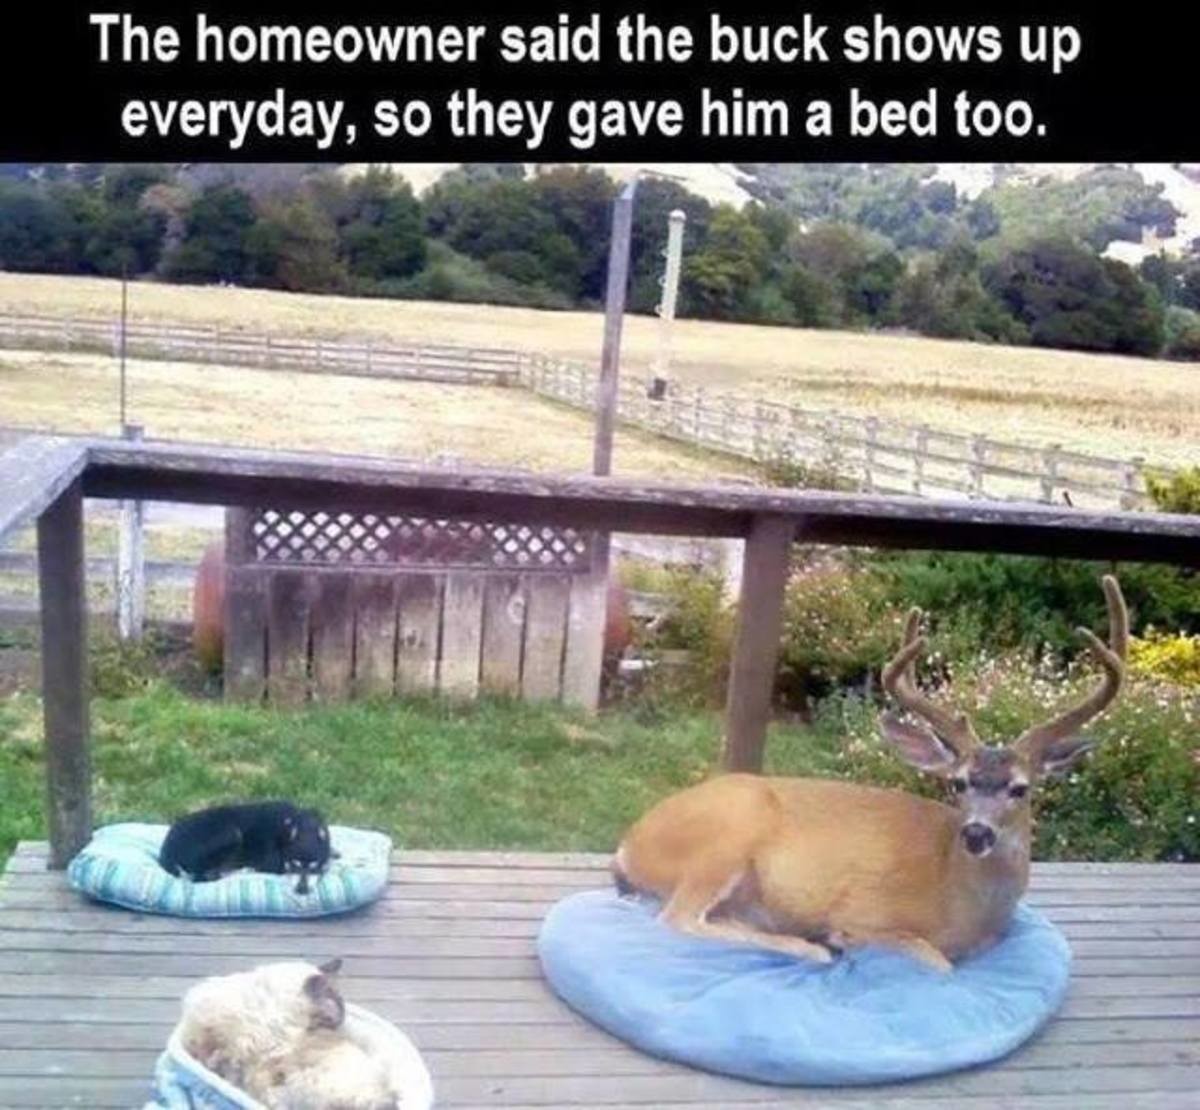 funny oregon memes - The homeowner said the buck shows up everyday, so they gave him a bed too.